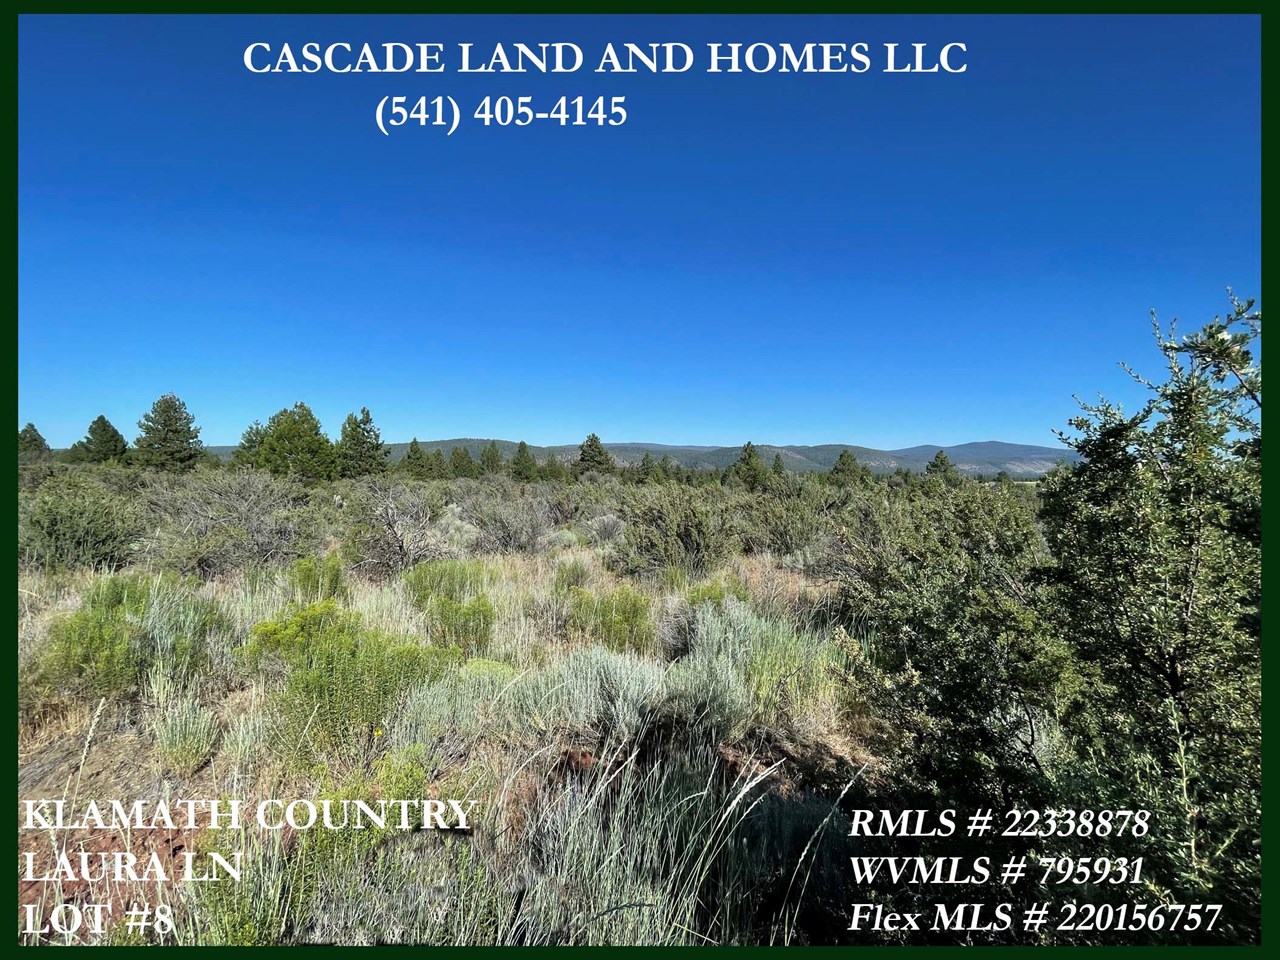 looking out across the property, it is fairly flat, offering many locations for a potential home site, bring your house plans and come explore the area!